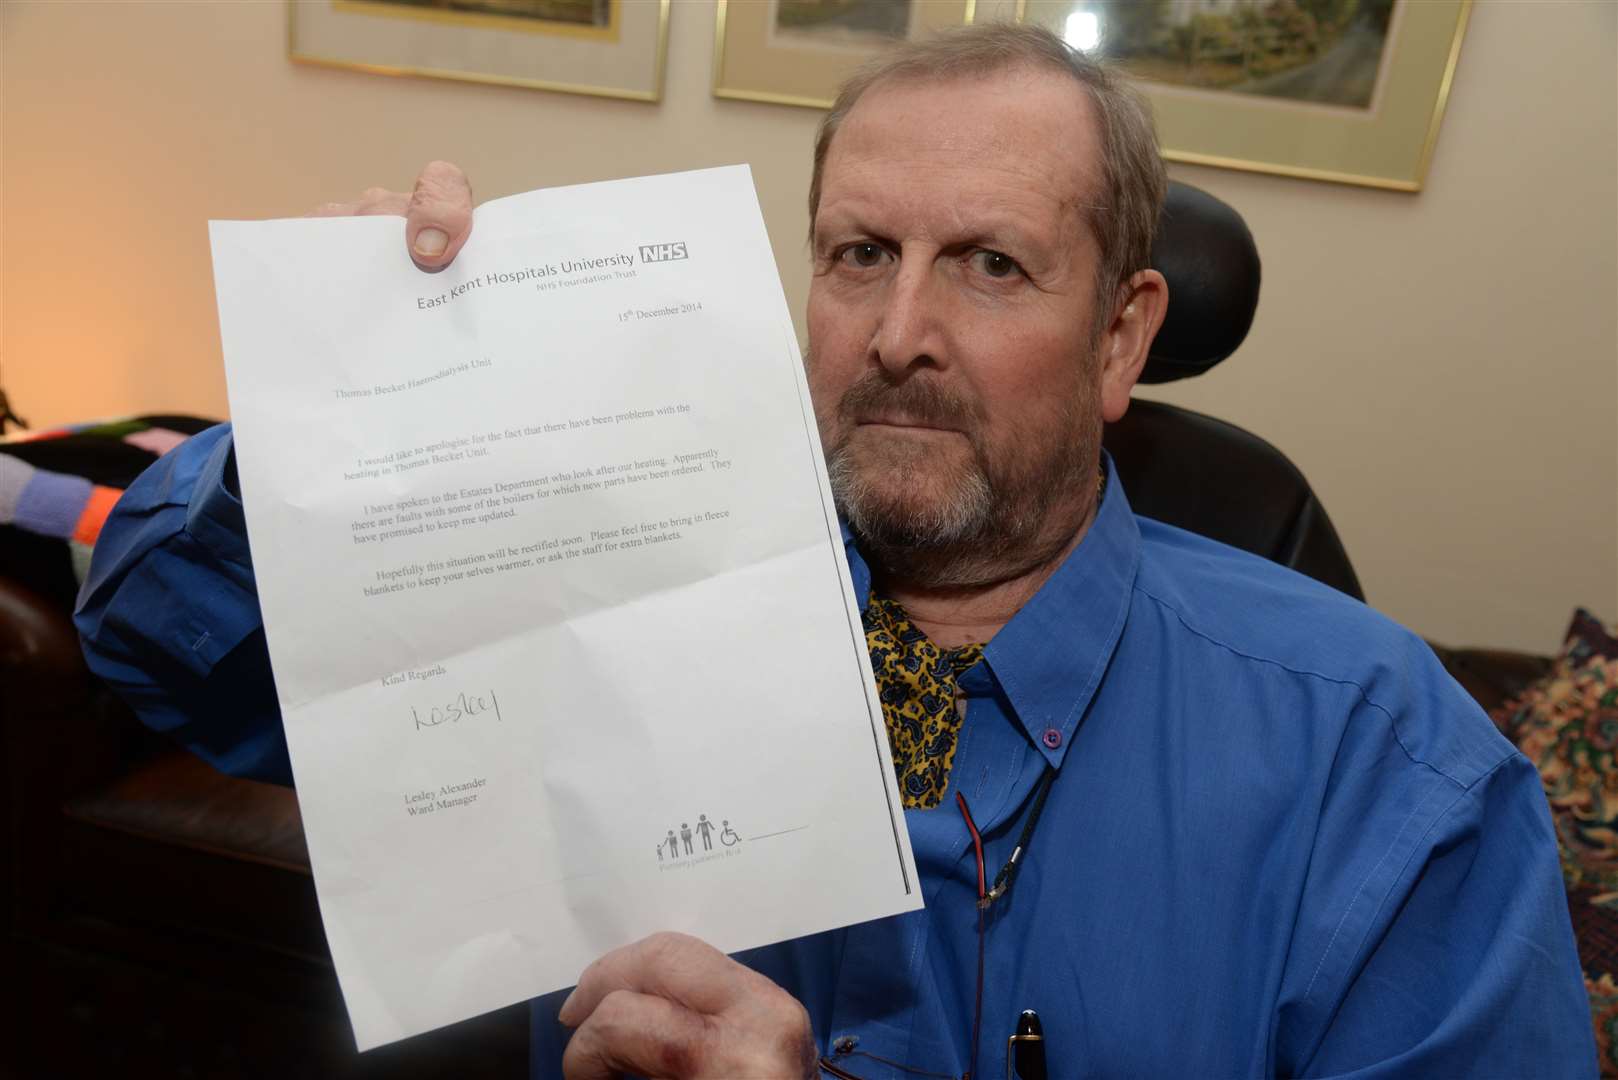 Reg Hansell of Shepherdswell with his letter of apology